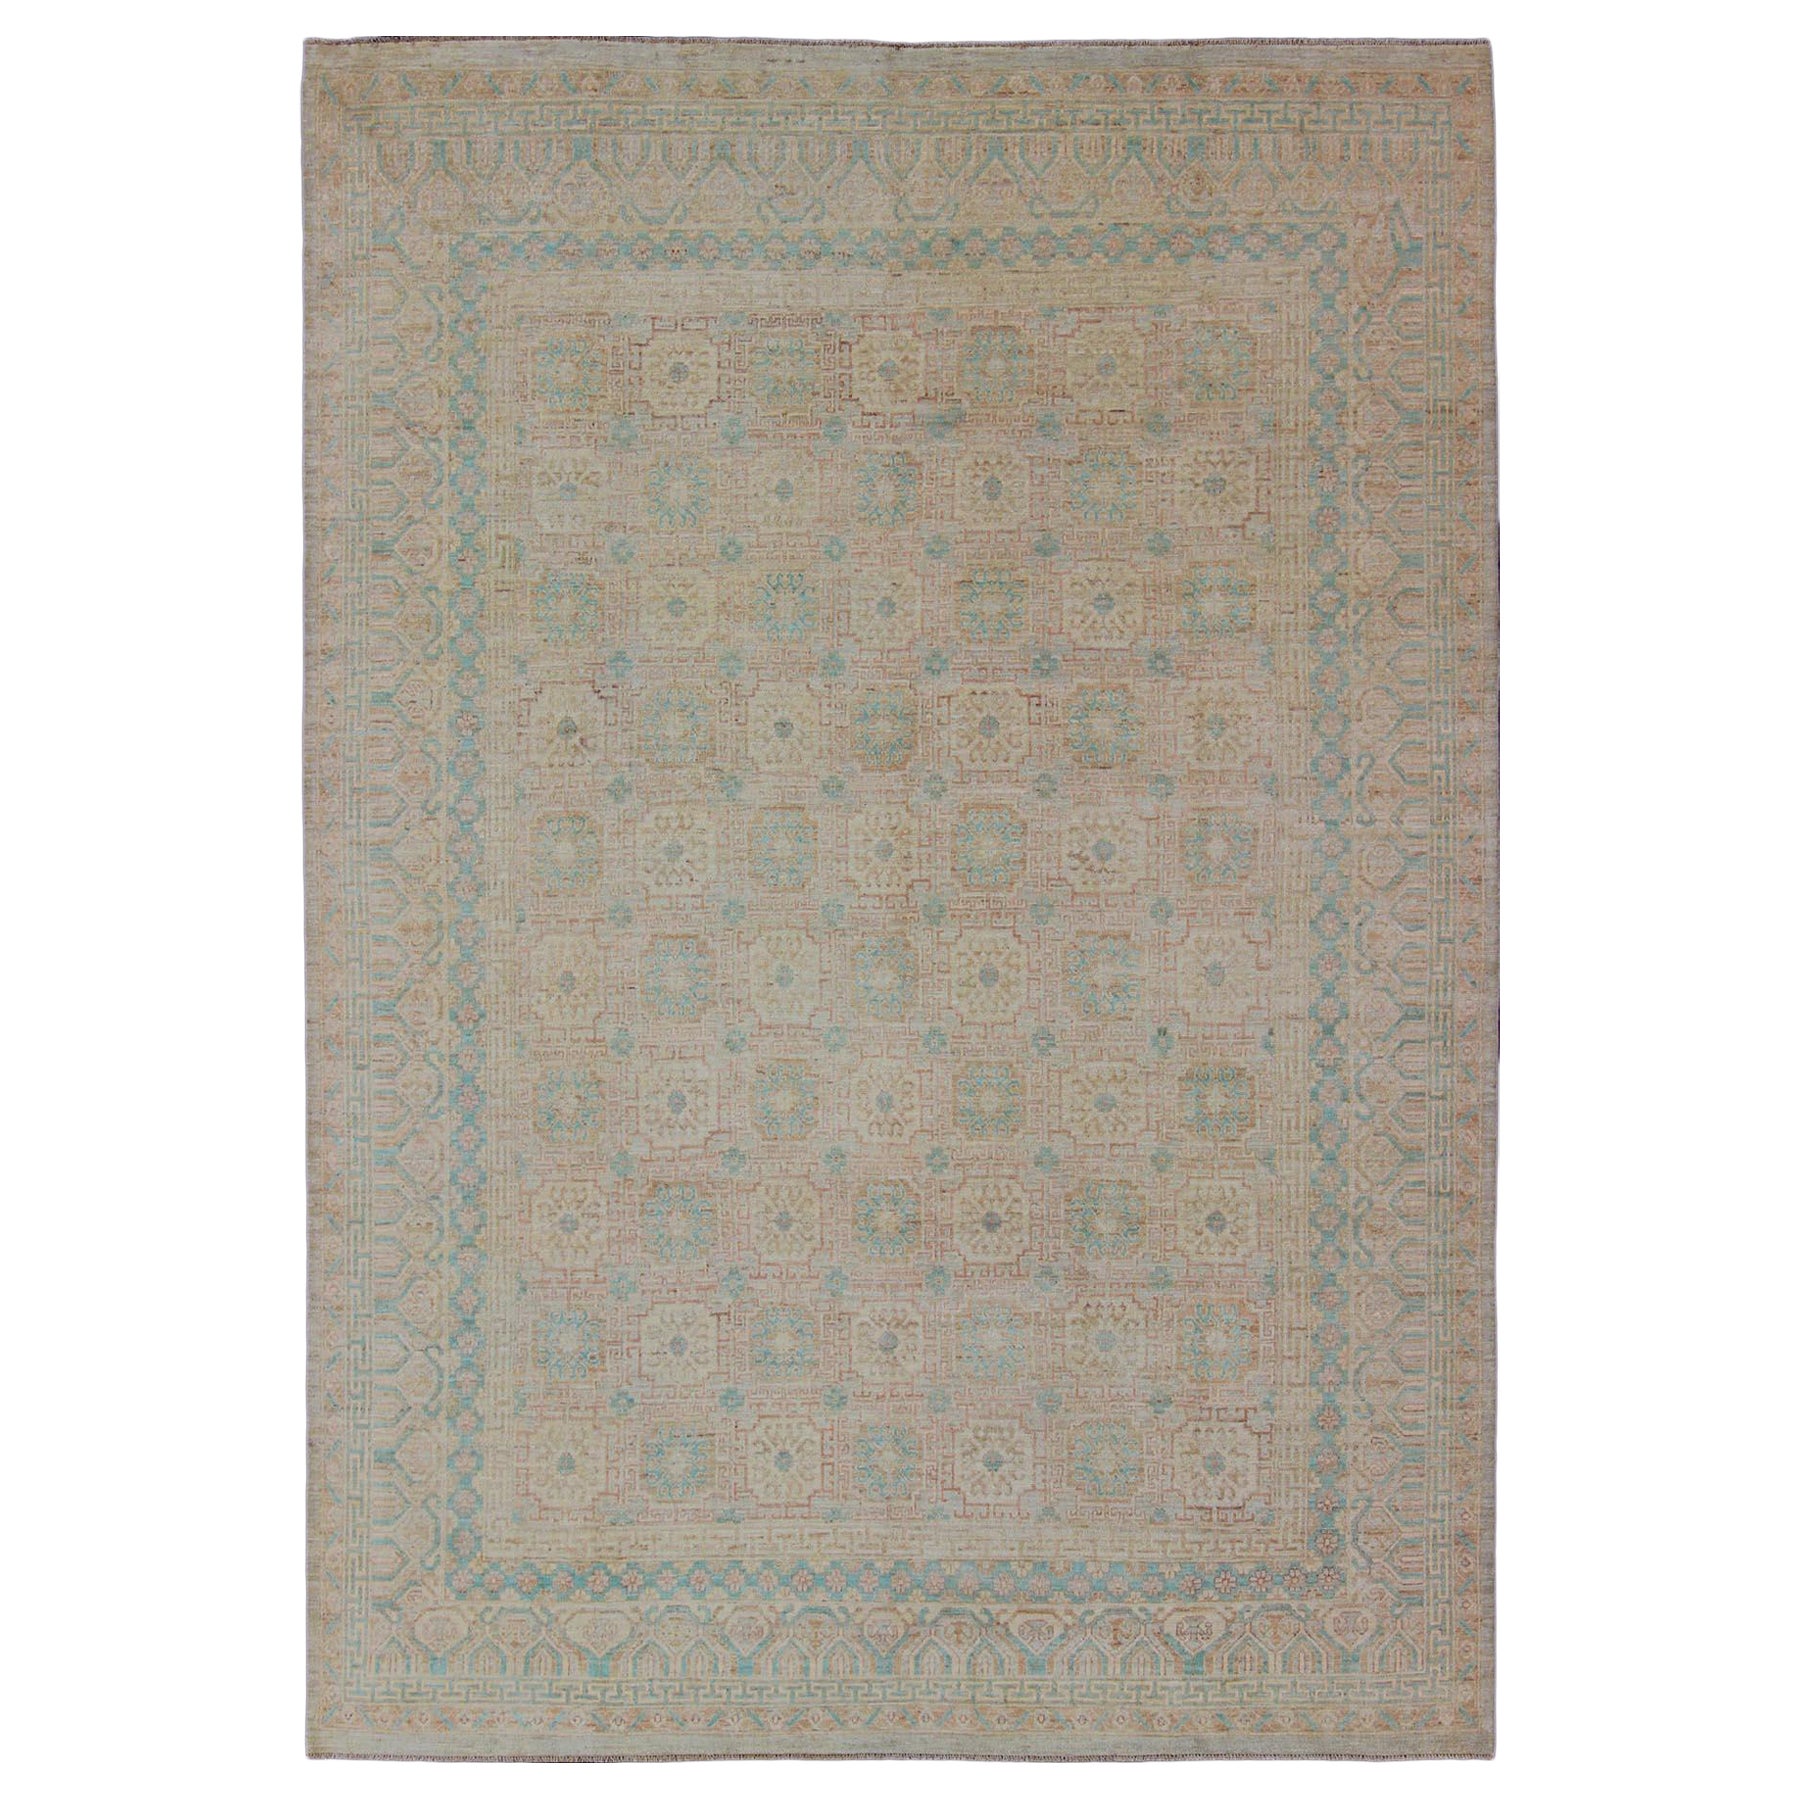 Khotan Design Rug with Geometric Medallions in Tan and Turquoise For Sale